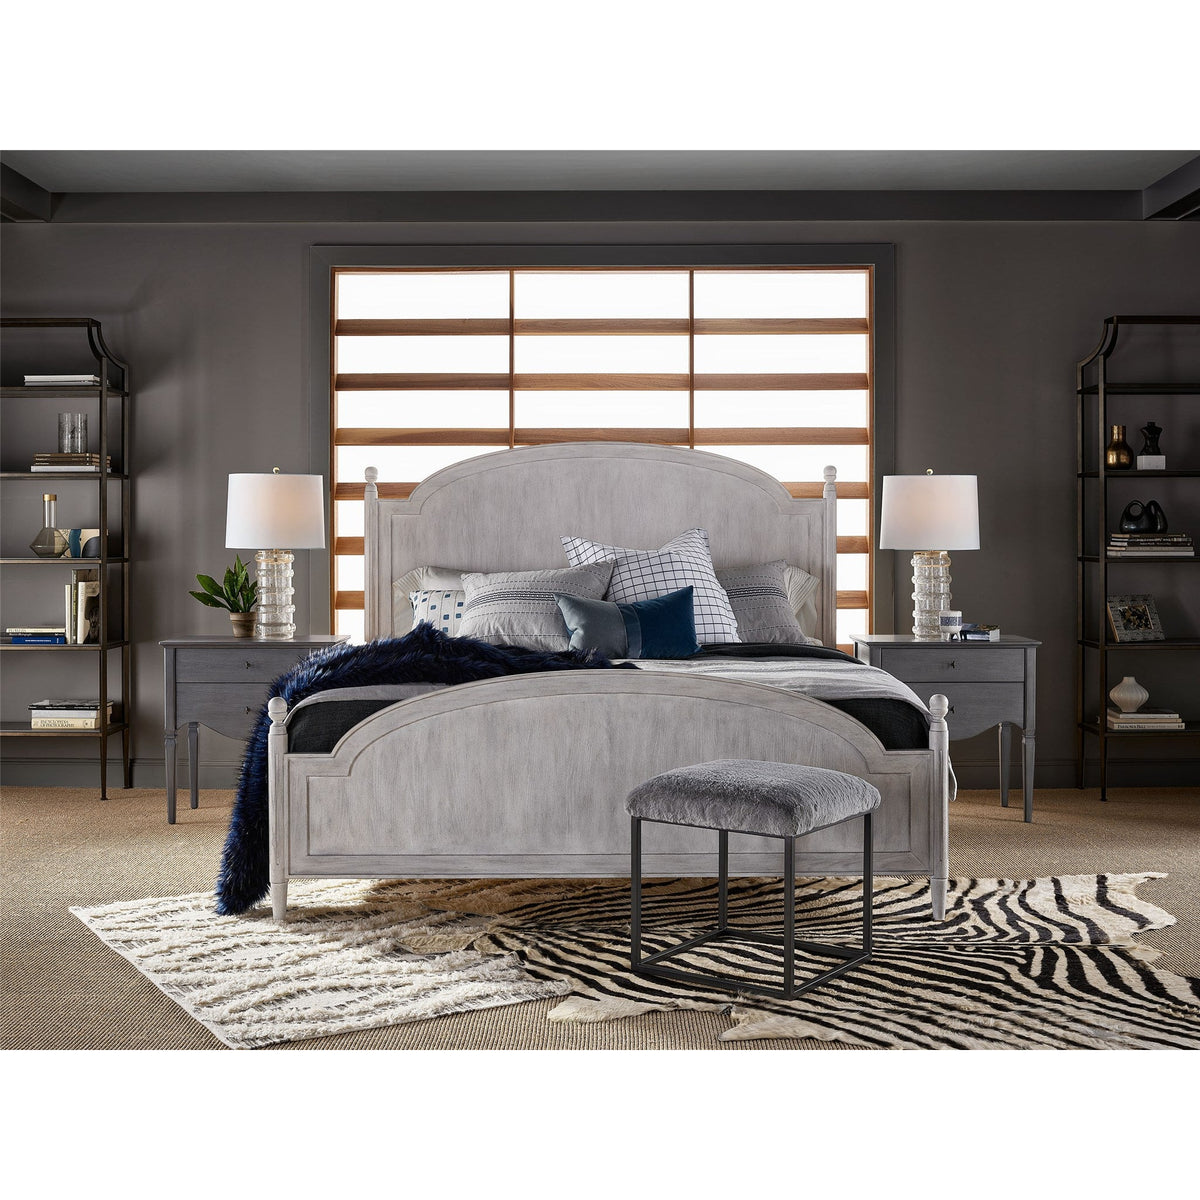 Pryce Panel Bed - Be Bold Furniture